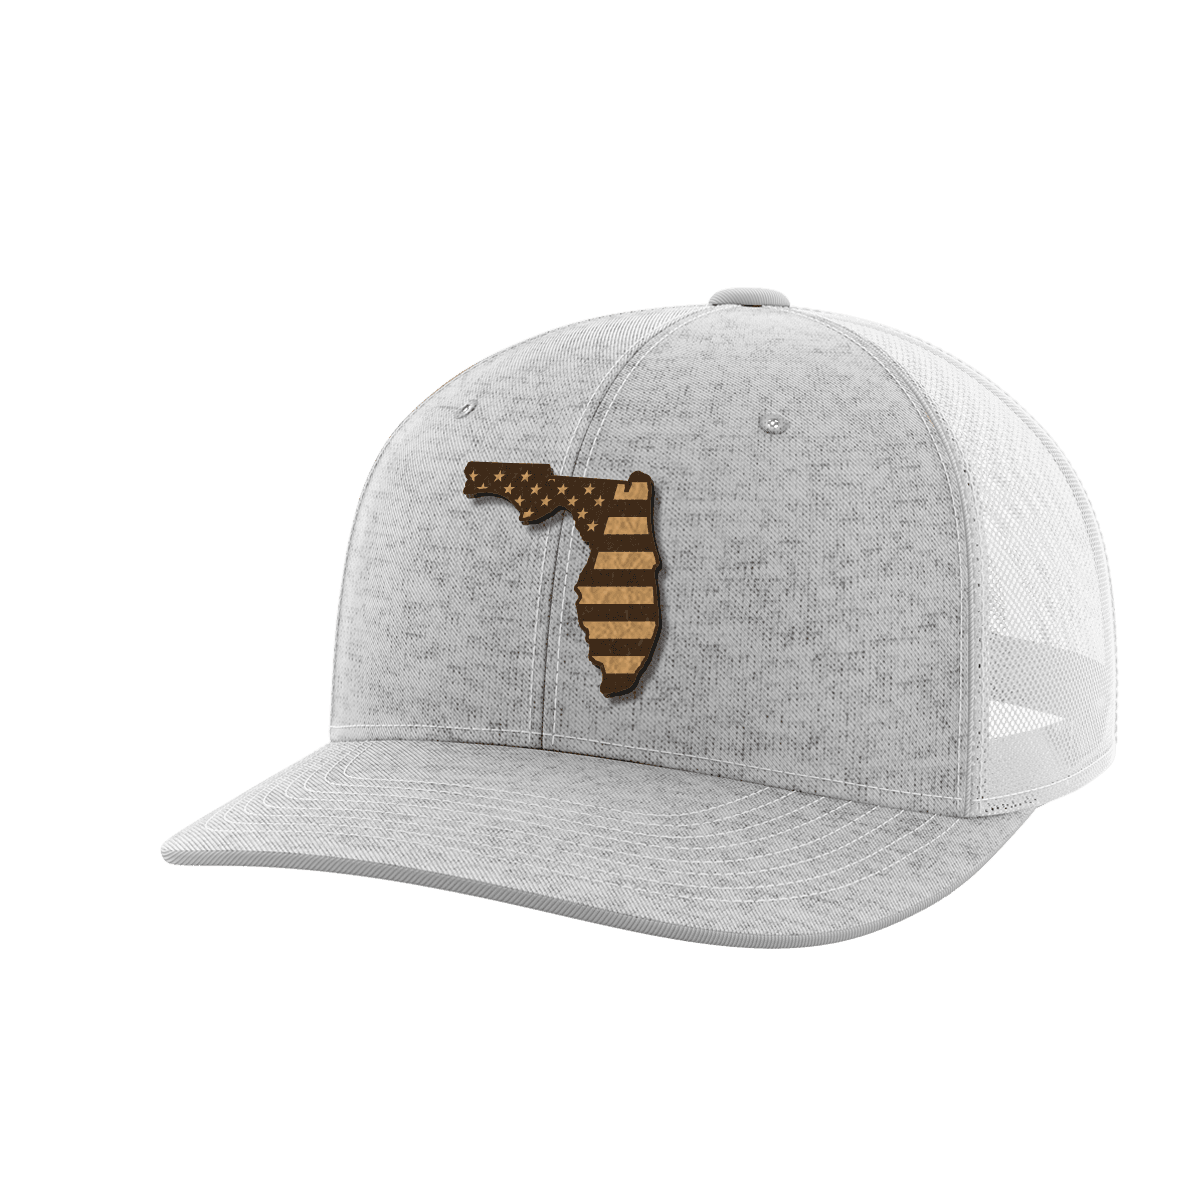 Thumbnail for Florida United Hats - Greater Half